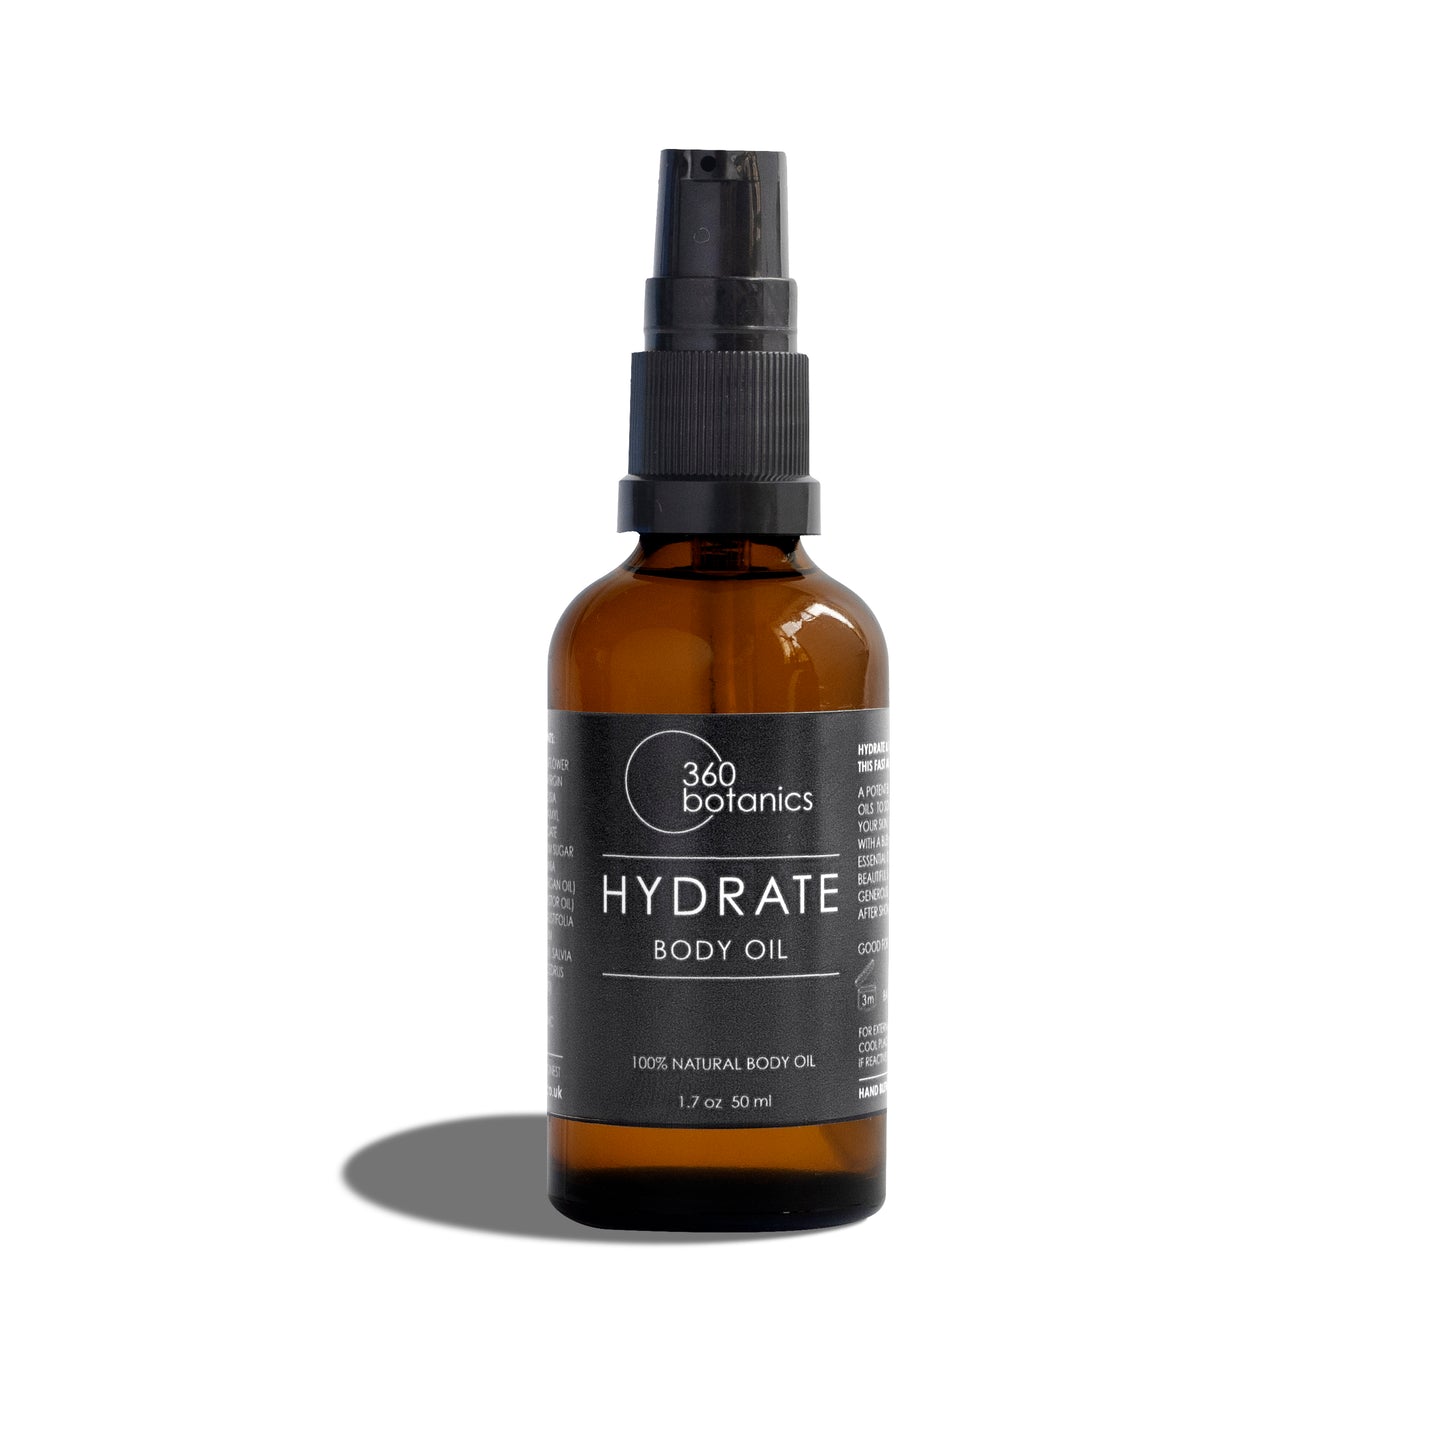 Image of hydrate body oil photographed on a white background